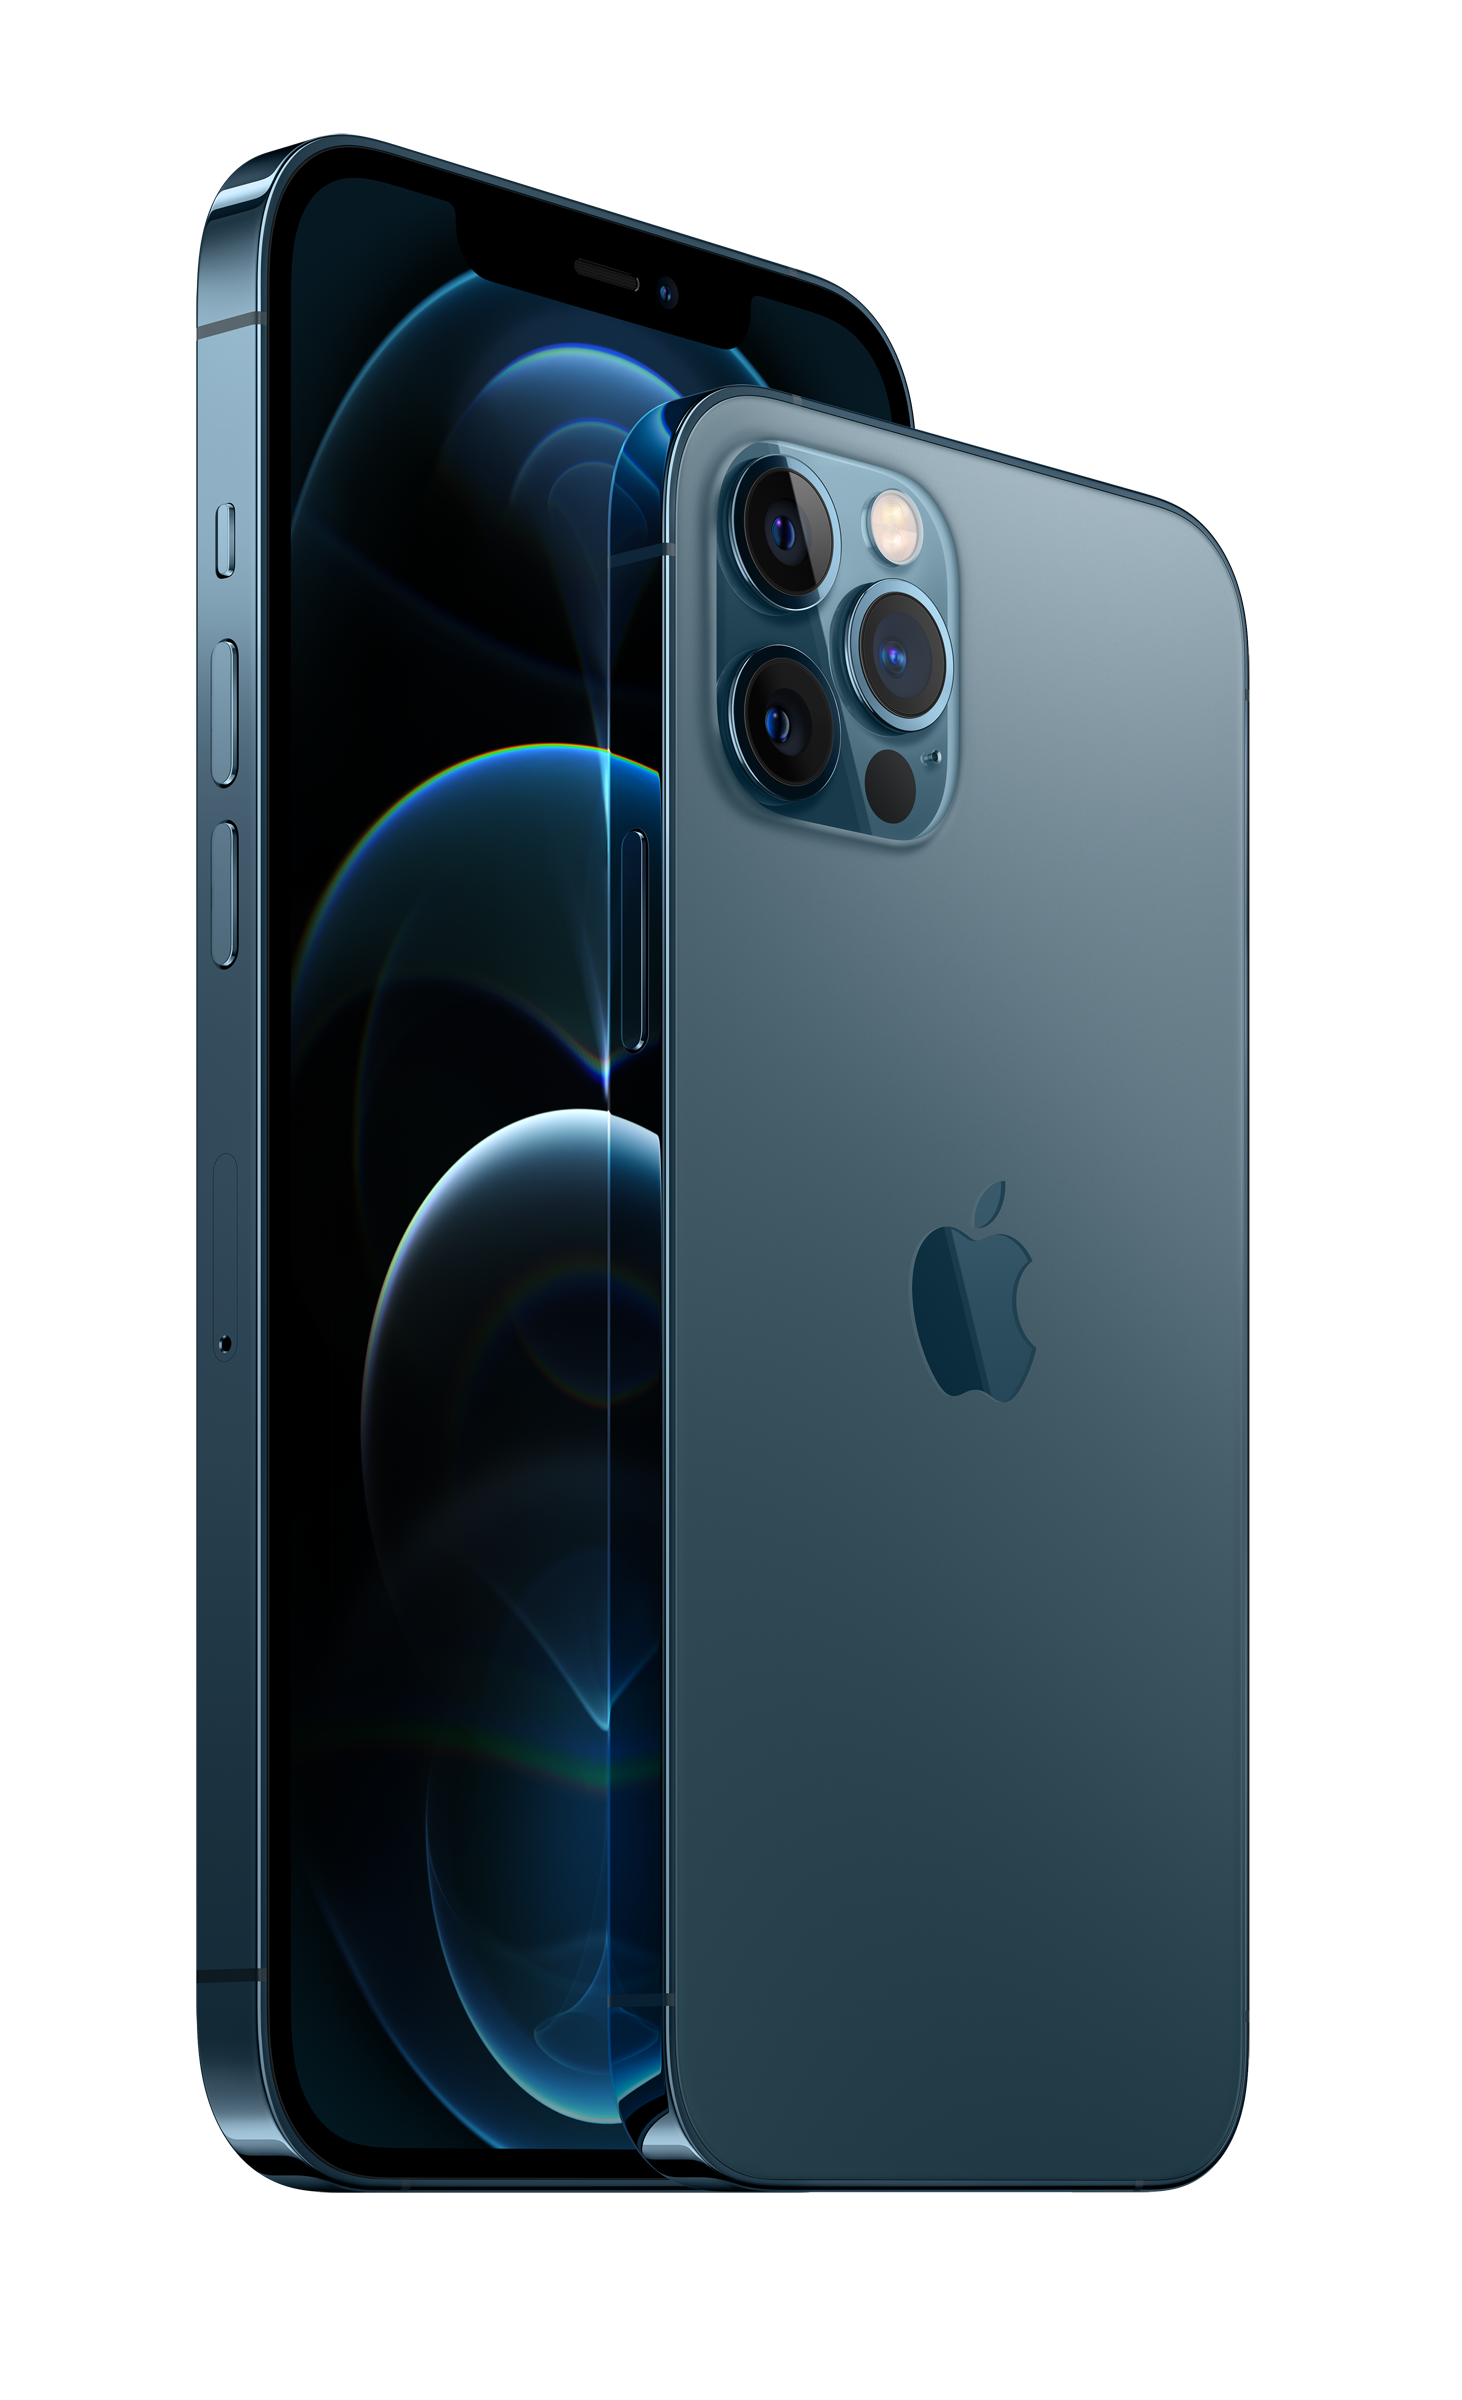 Iphone 12 Pro Max Release Date / Everything We Know About New Iphone 12